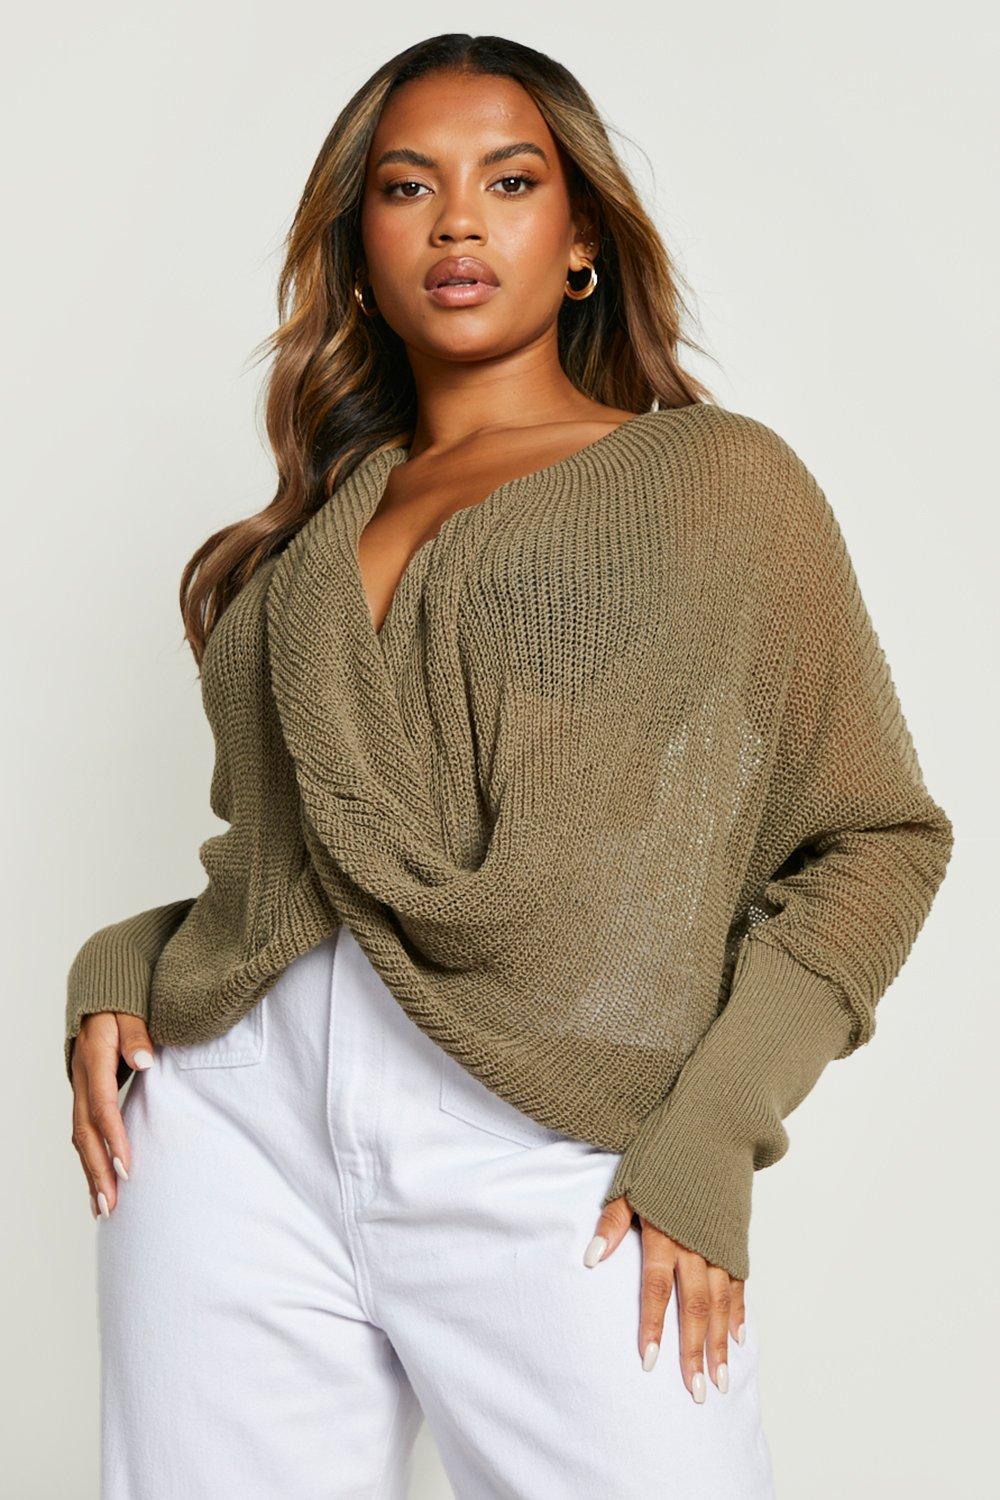 Boohoo Womens Plus Isabelle Wrap Front Knitted Jumper | eBay